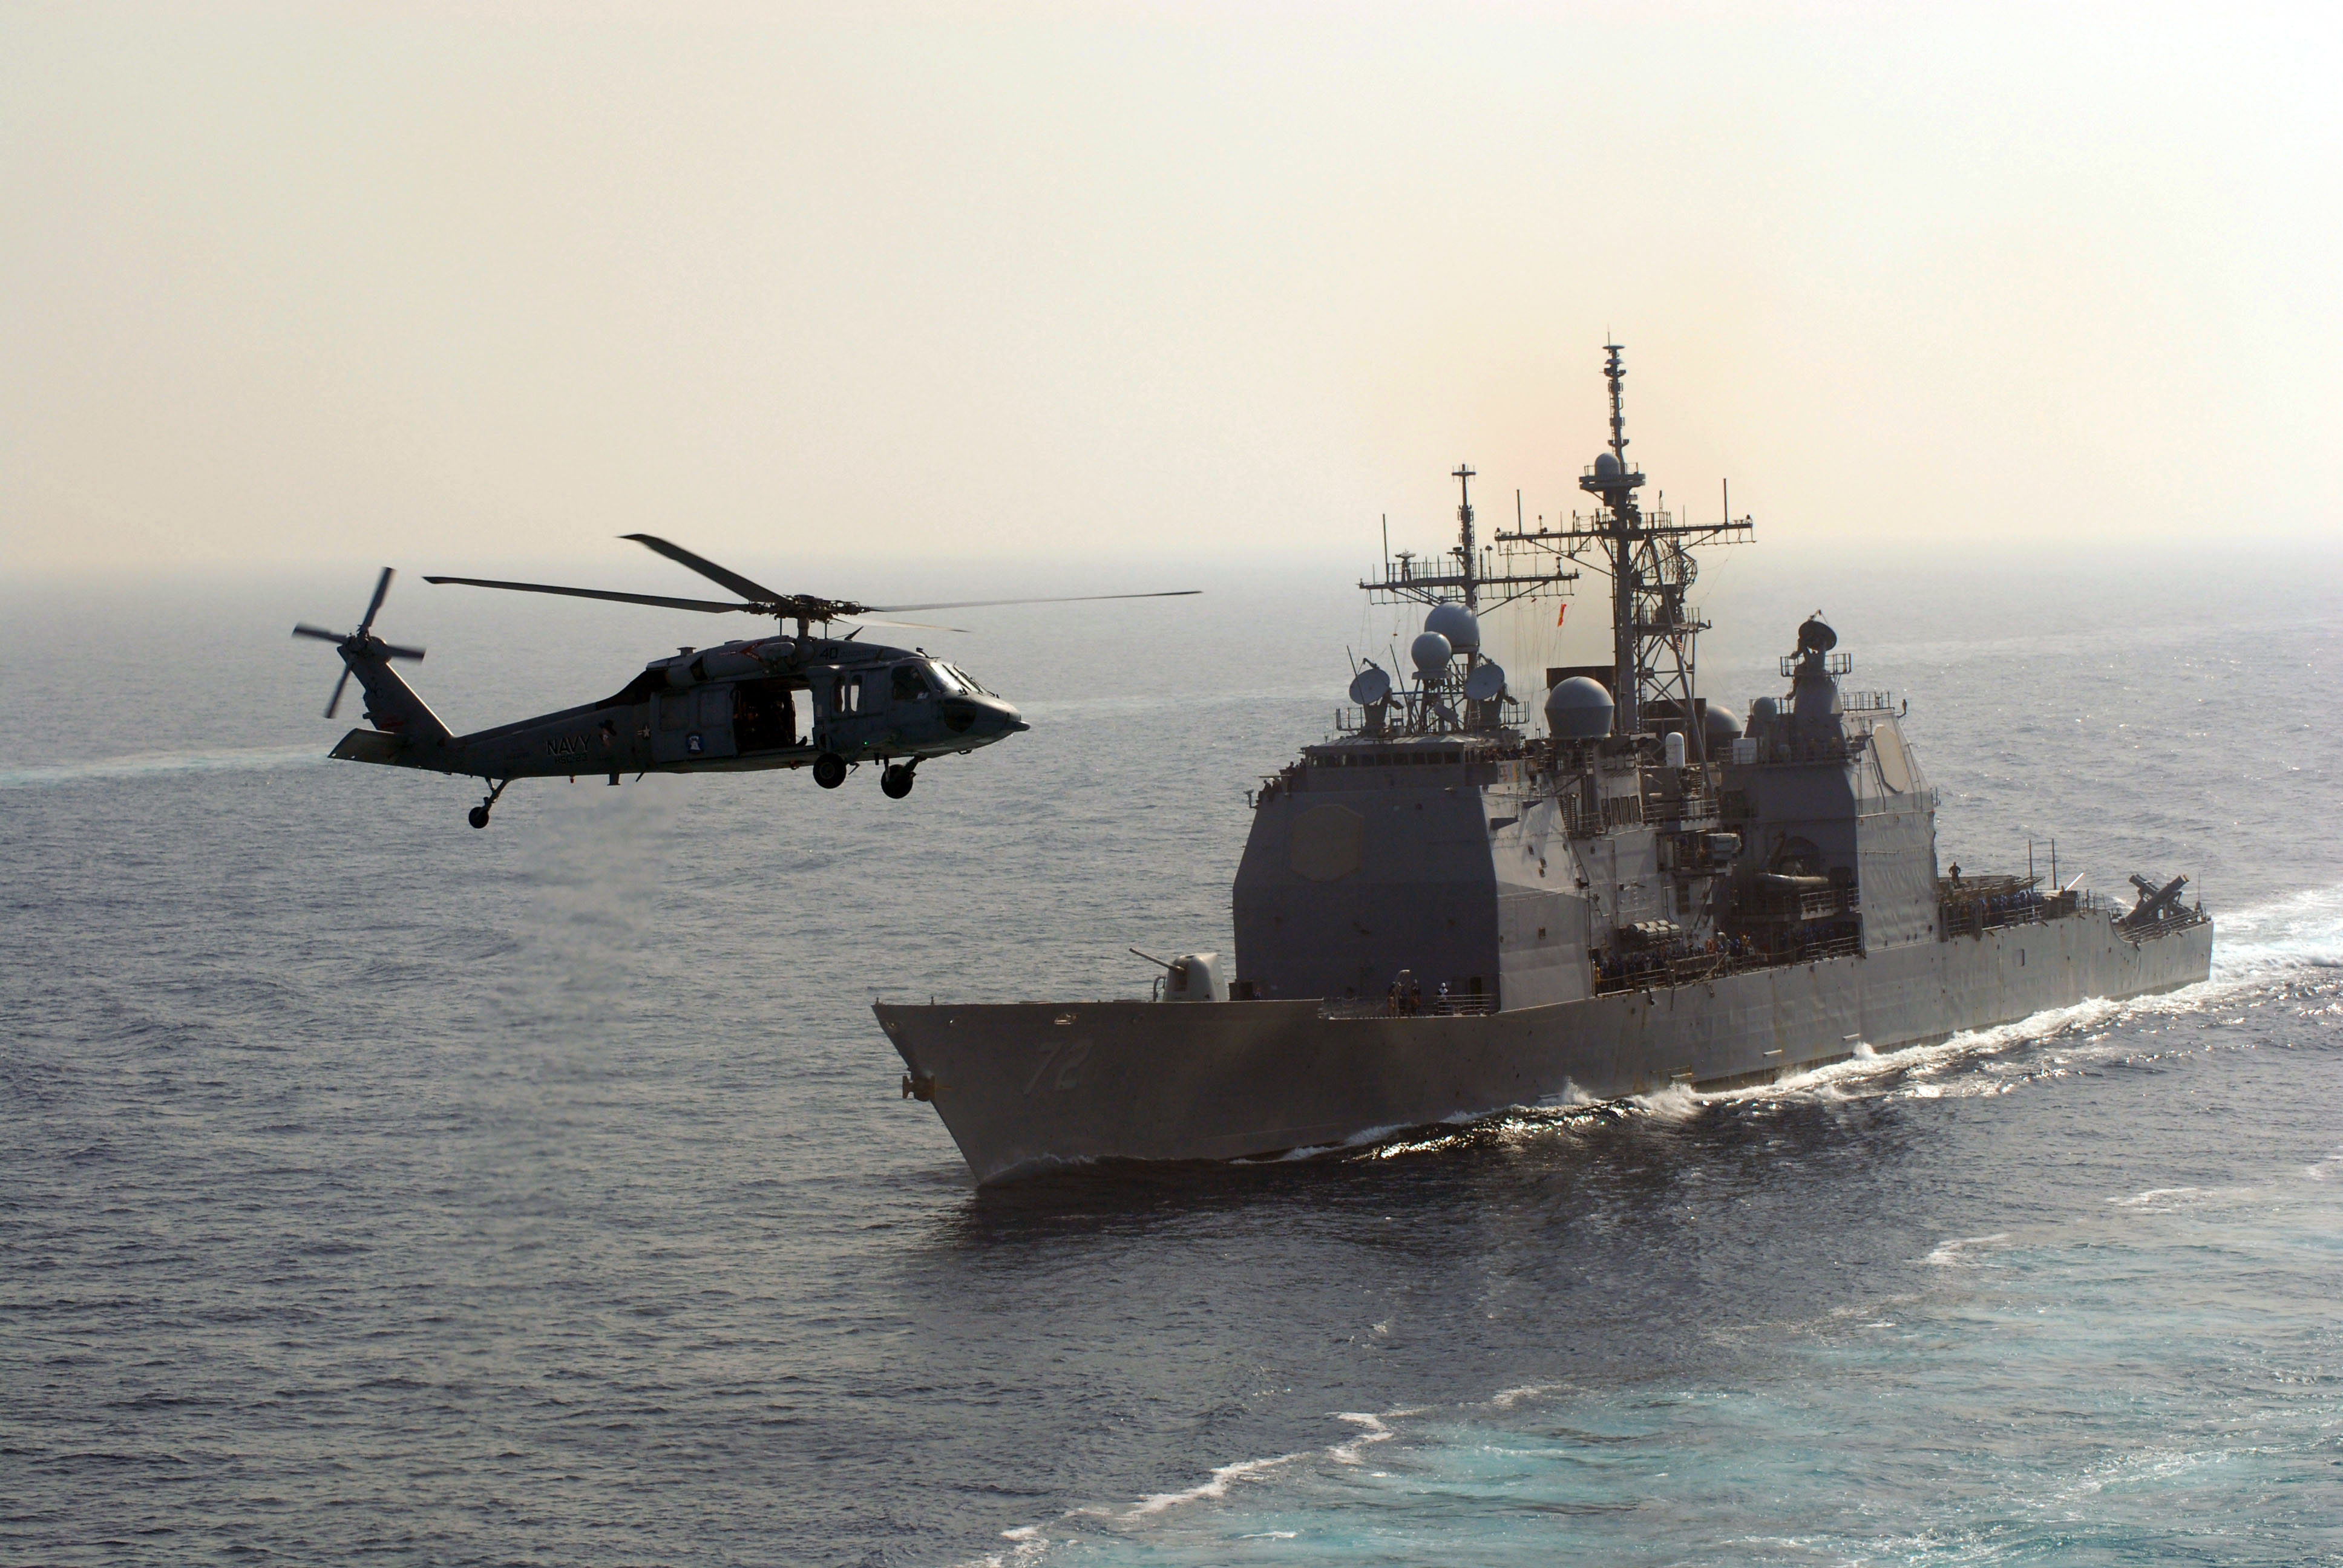 US Navy 070414-N-3038W-327 An MH-60S Seahawk, from the Predators of Helicopter Sea Combat Squadron (HSC) 23, flies near USS Vella Gulf (CG 72) during a replenishment at sea 